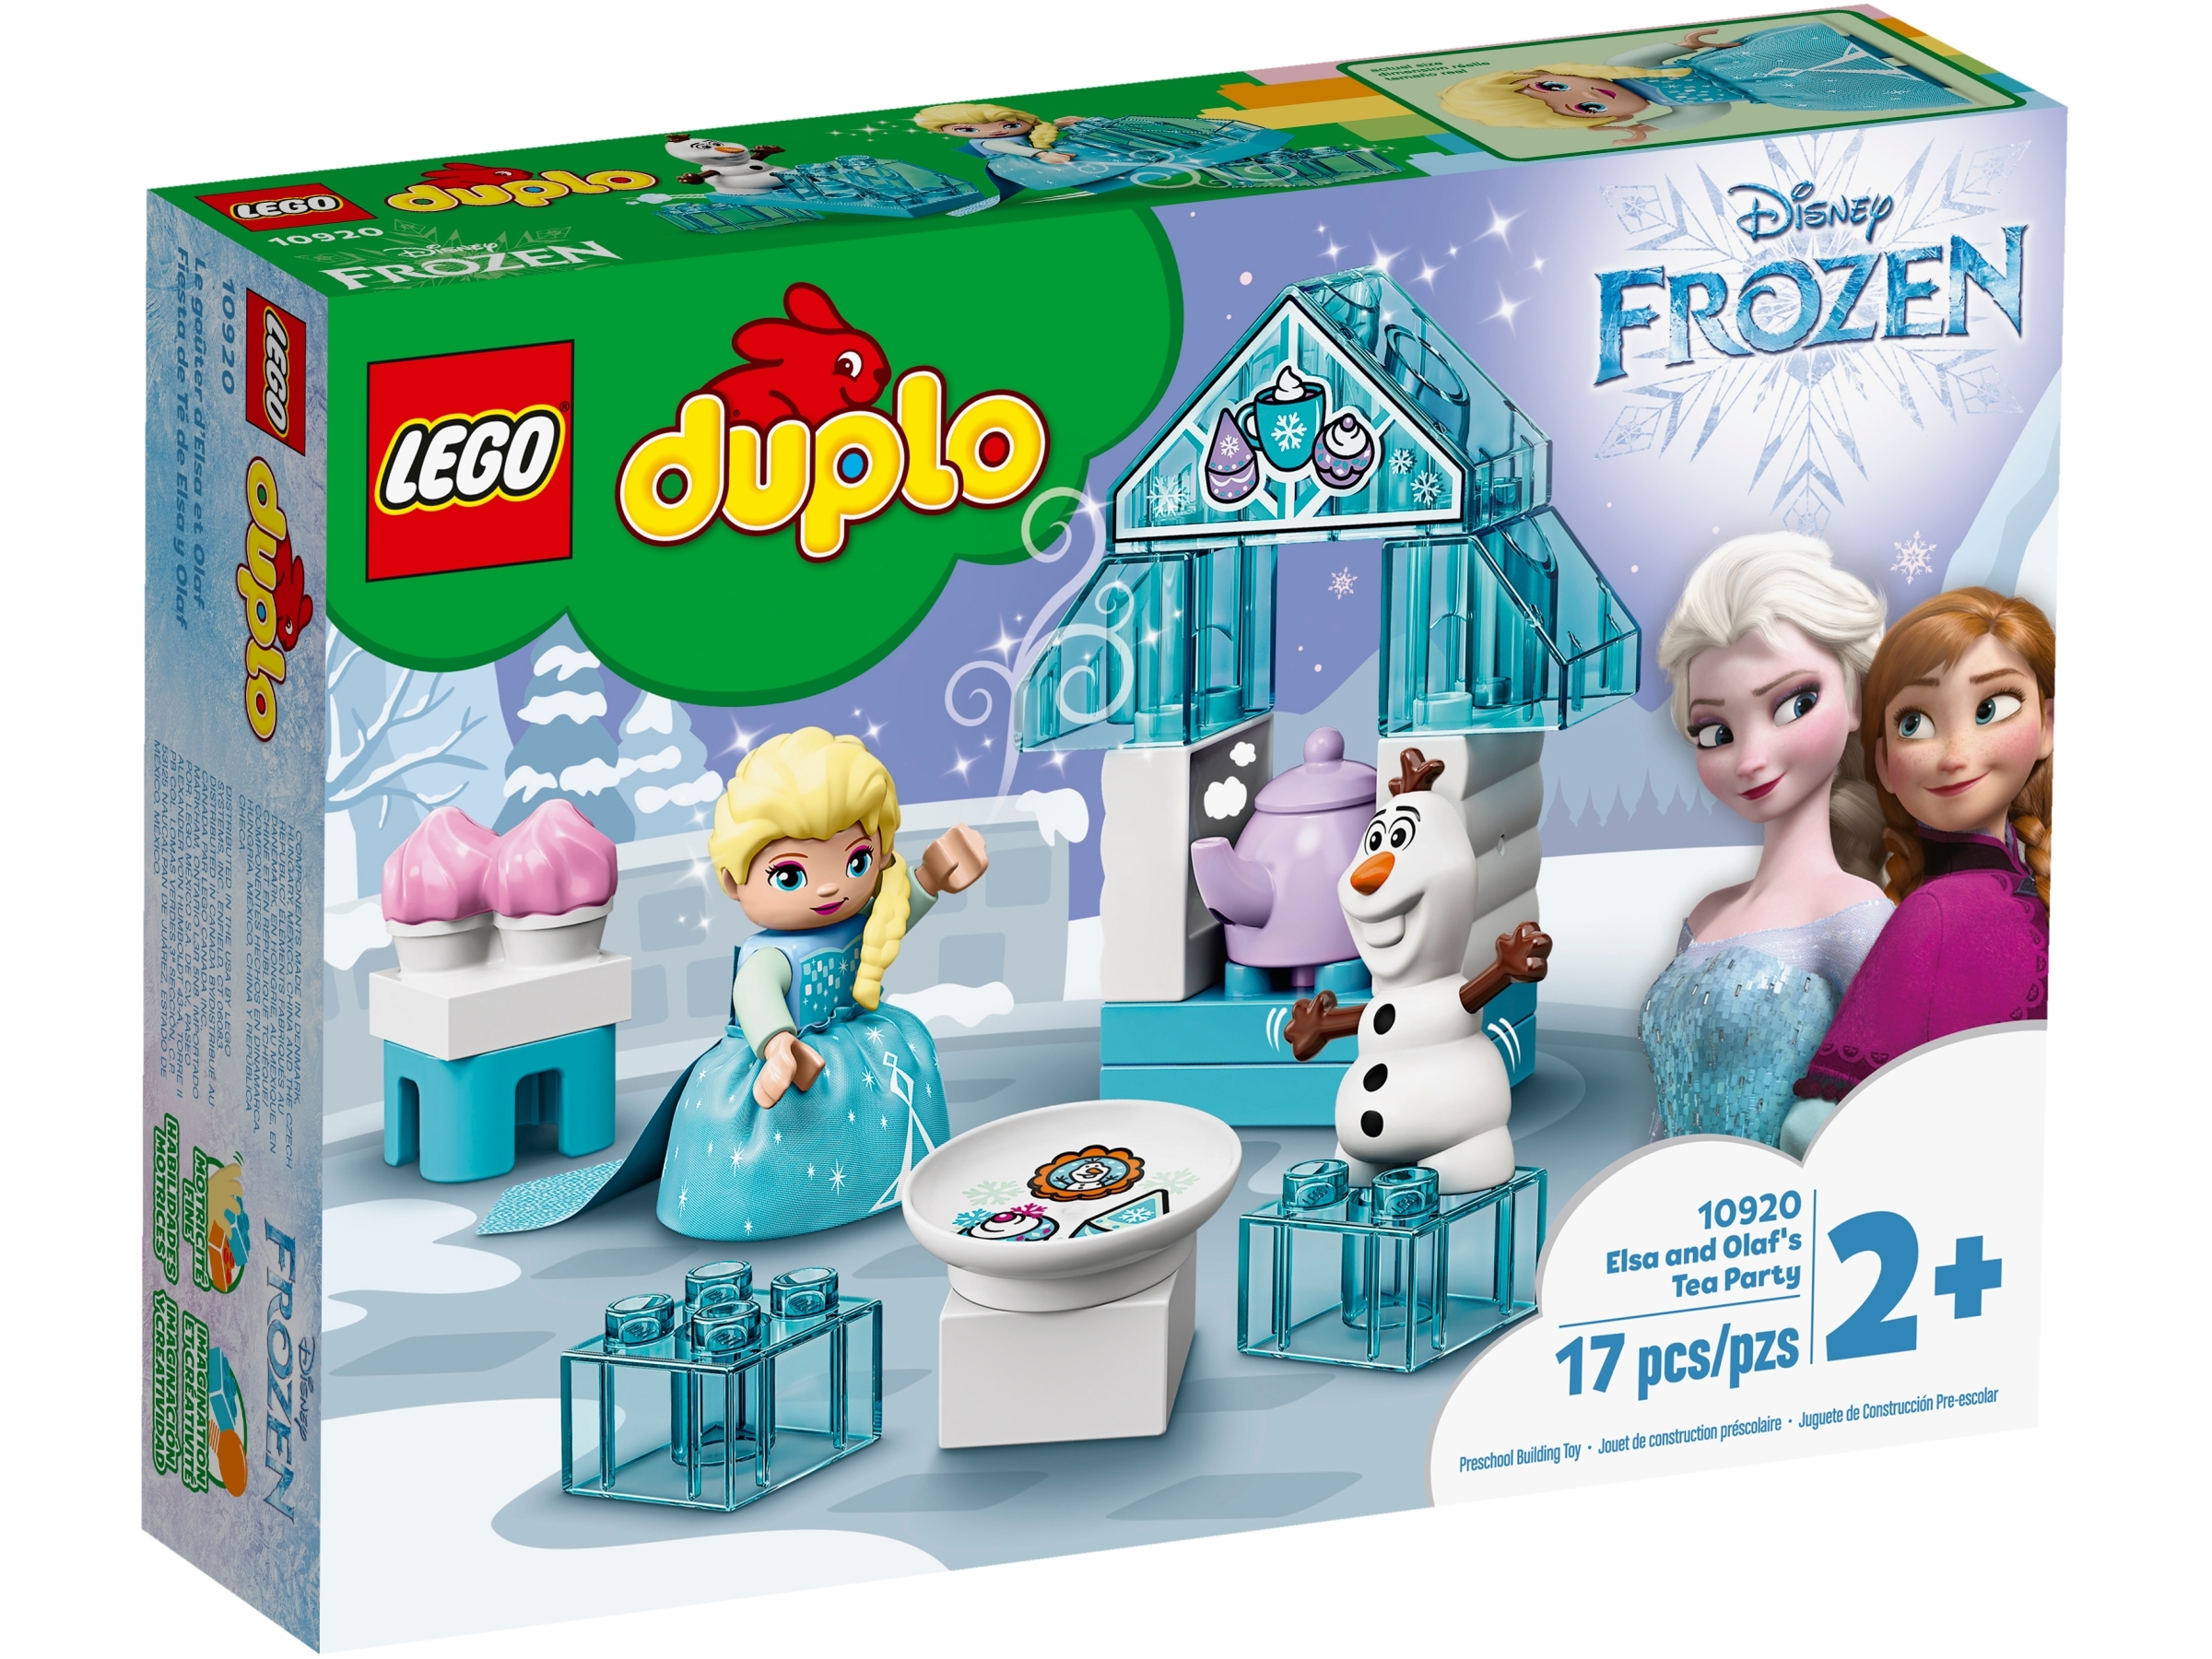 Official Disney 6 Pc Frozen Figurine Playset Special Xmas Gift For Girls Kids 